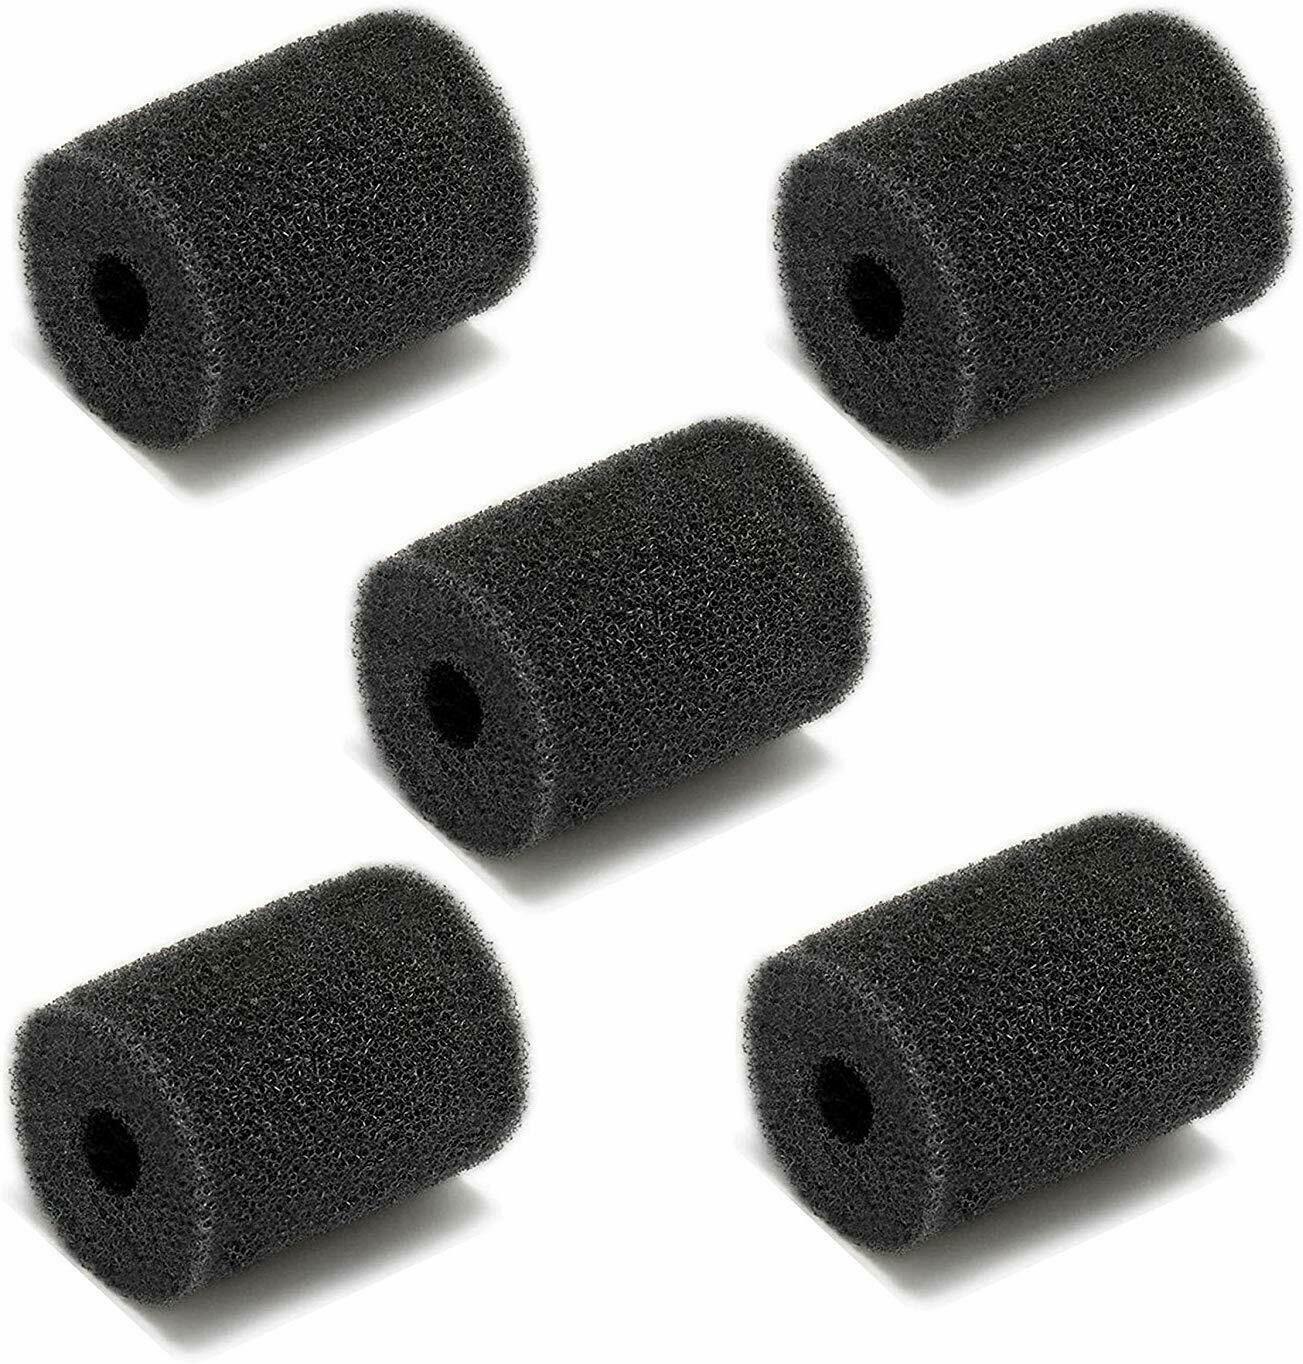 5 Pool Cleaner Sweep Hose Tail Scrubber For Polaris 9-100-3105 W7230245 Sparesbarn